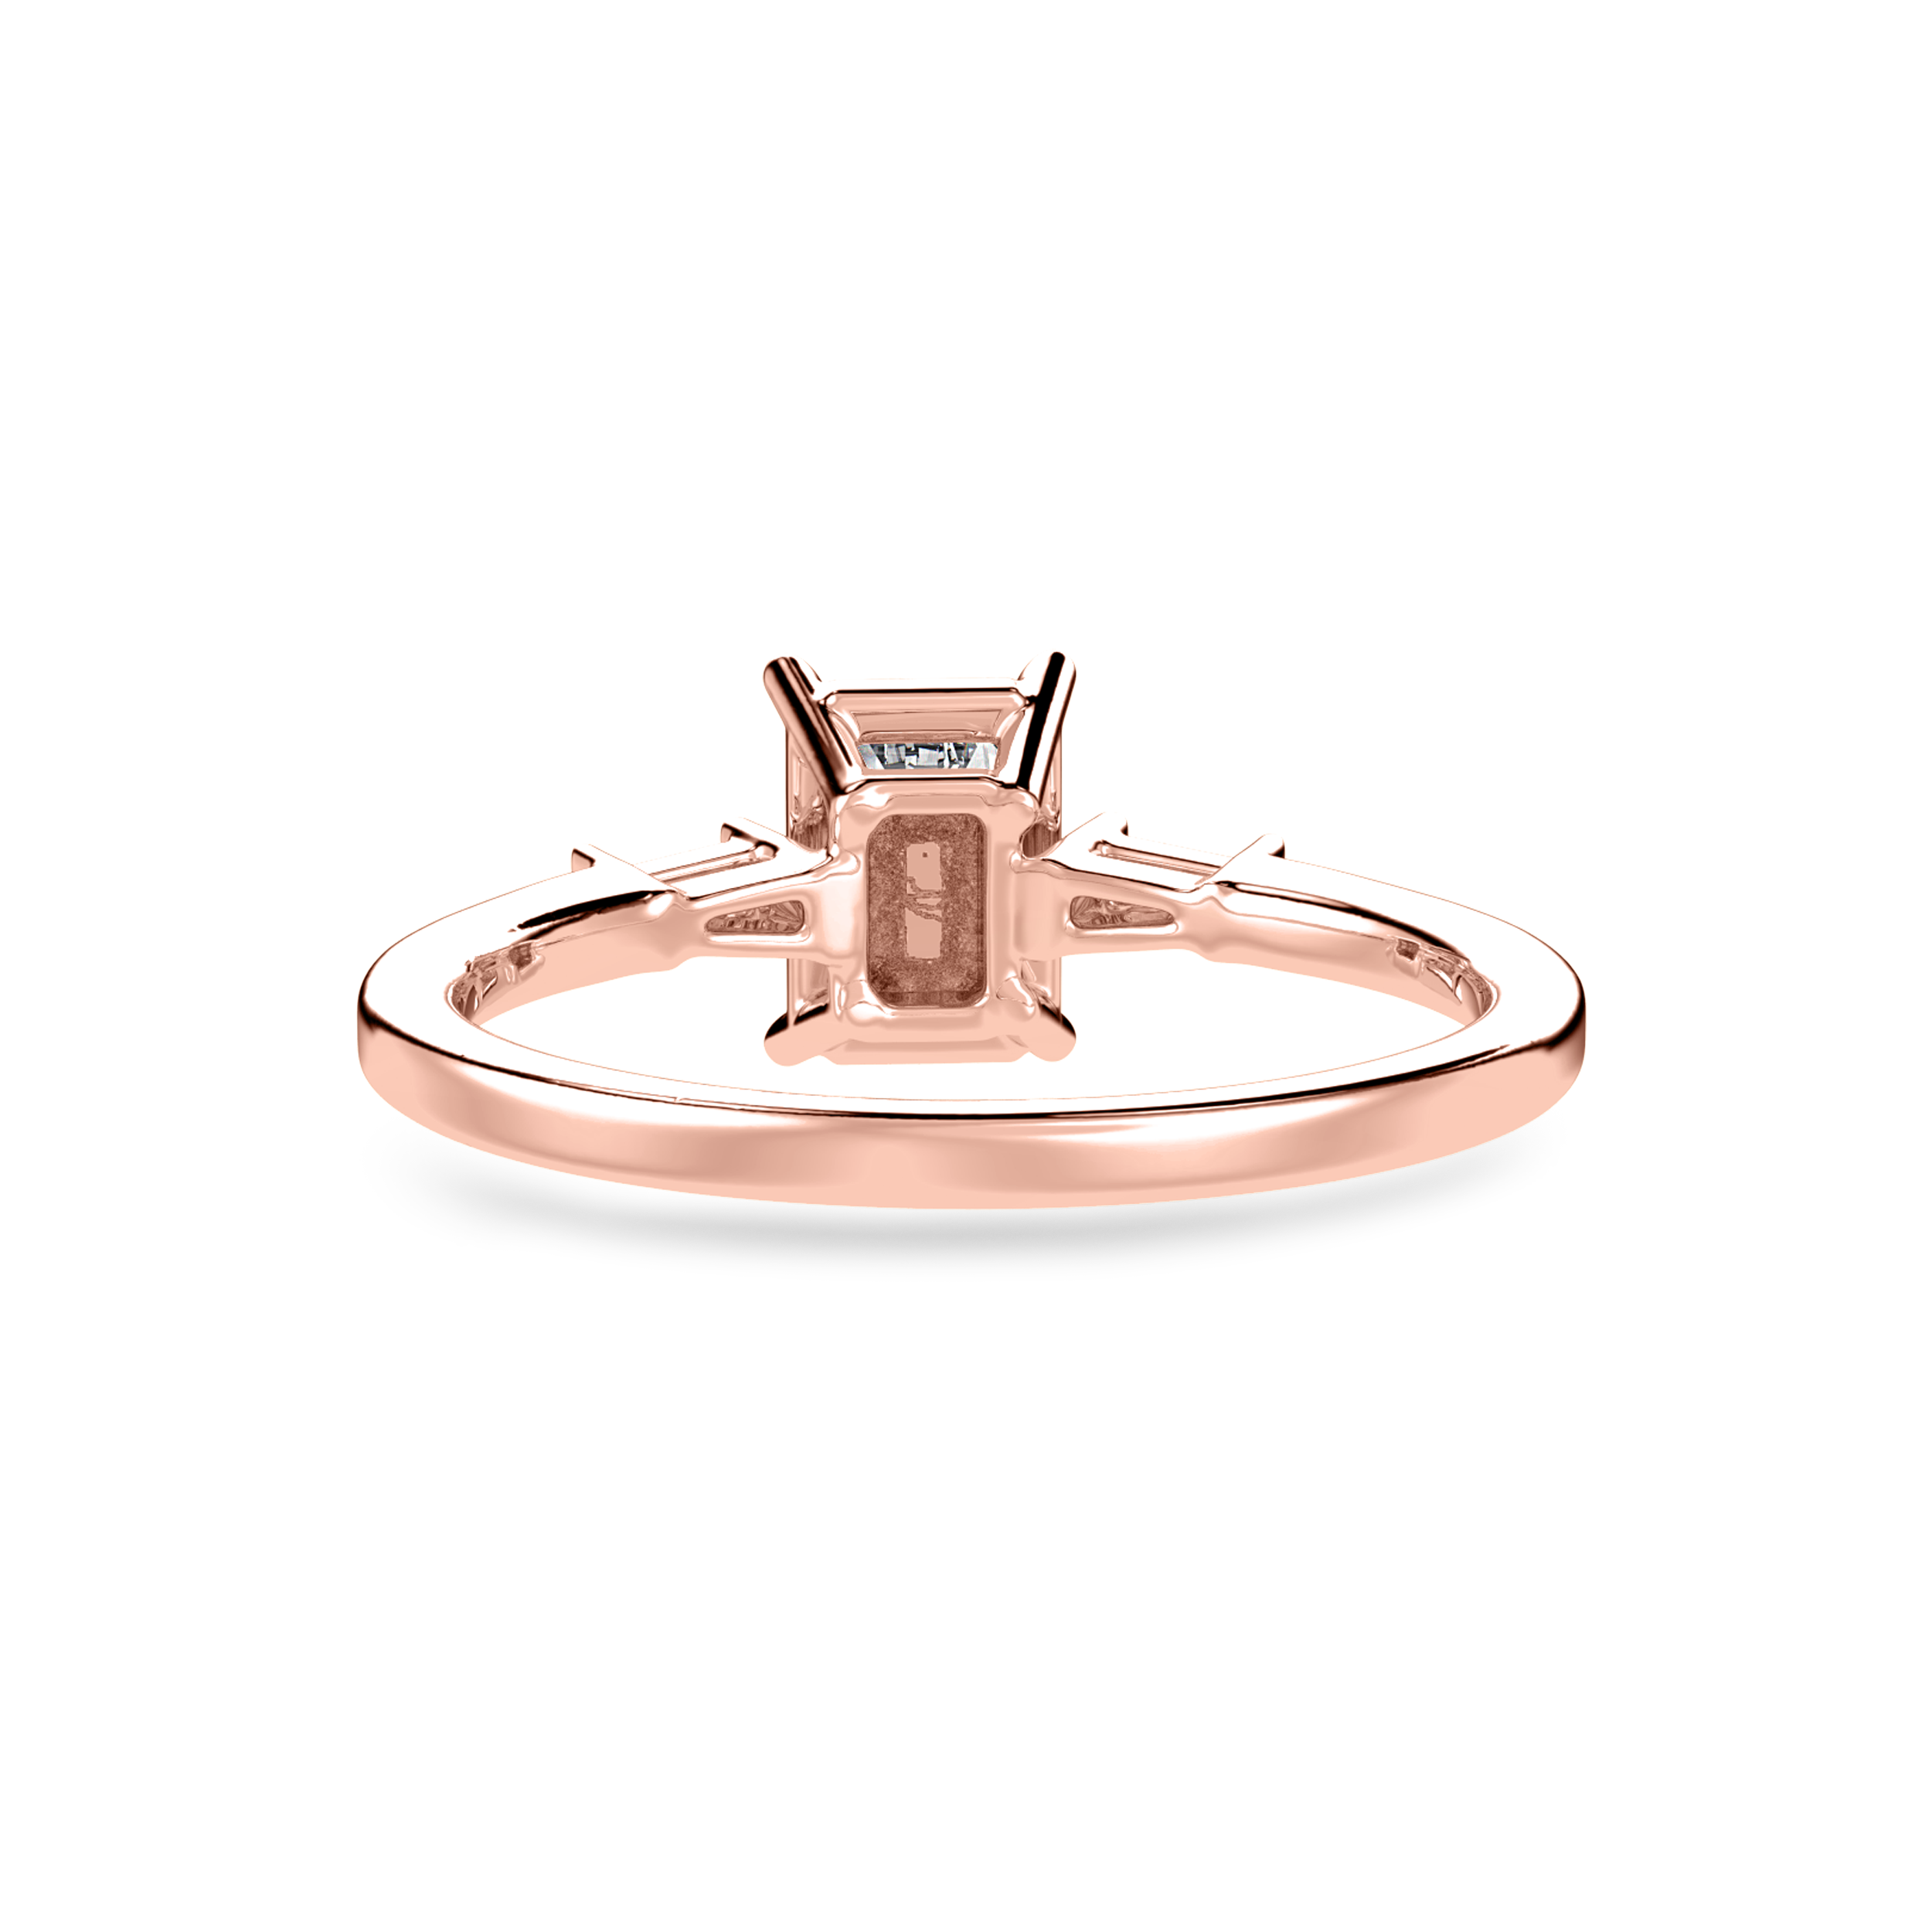 70-Pointer Emerald Cut Solitaire with Baguette Cut Diamond Accents 18K Rose Gold Solitaire Ring JL AU 1224R-B   Jewelove.US